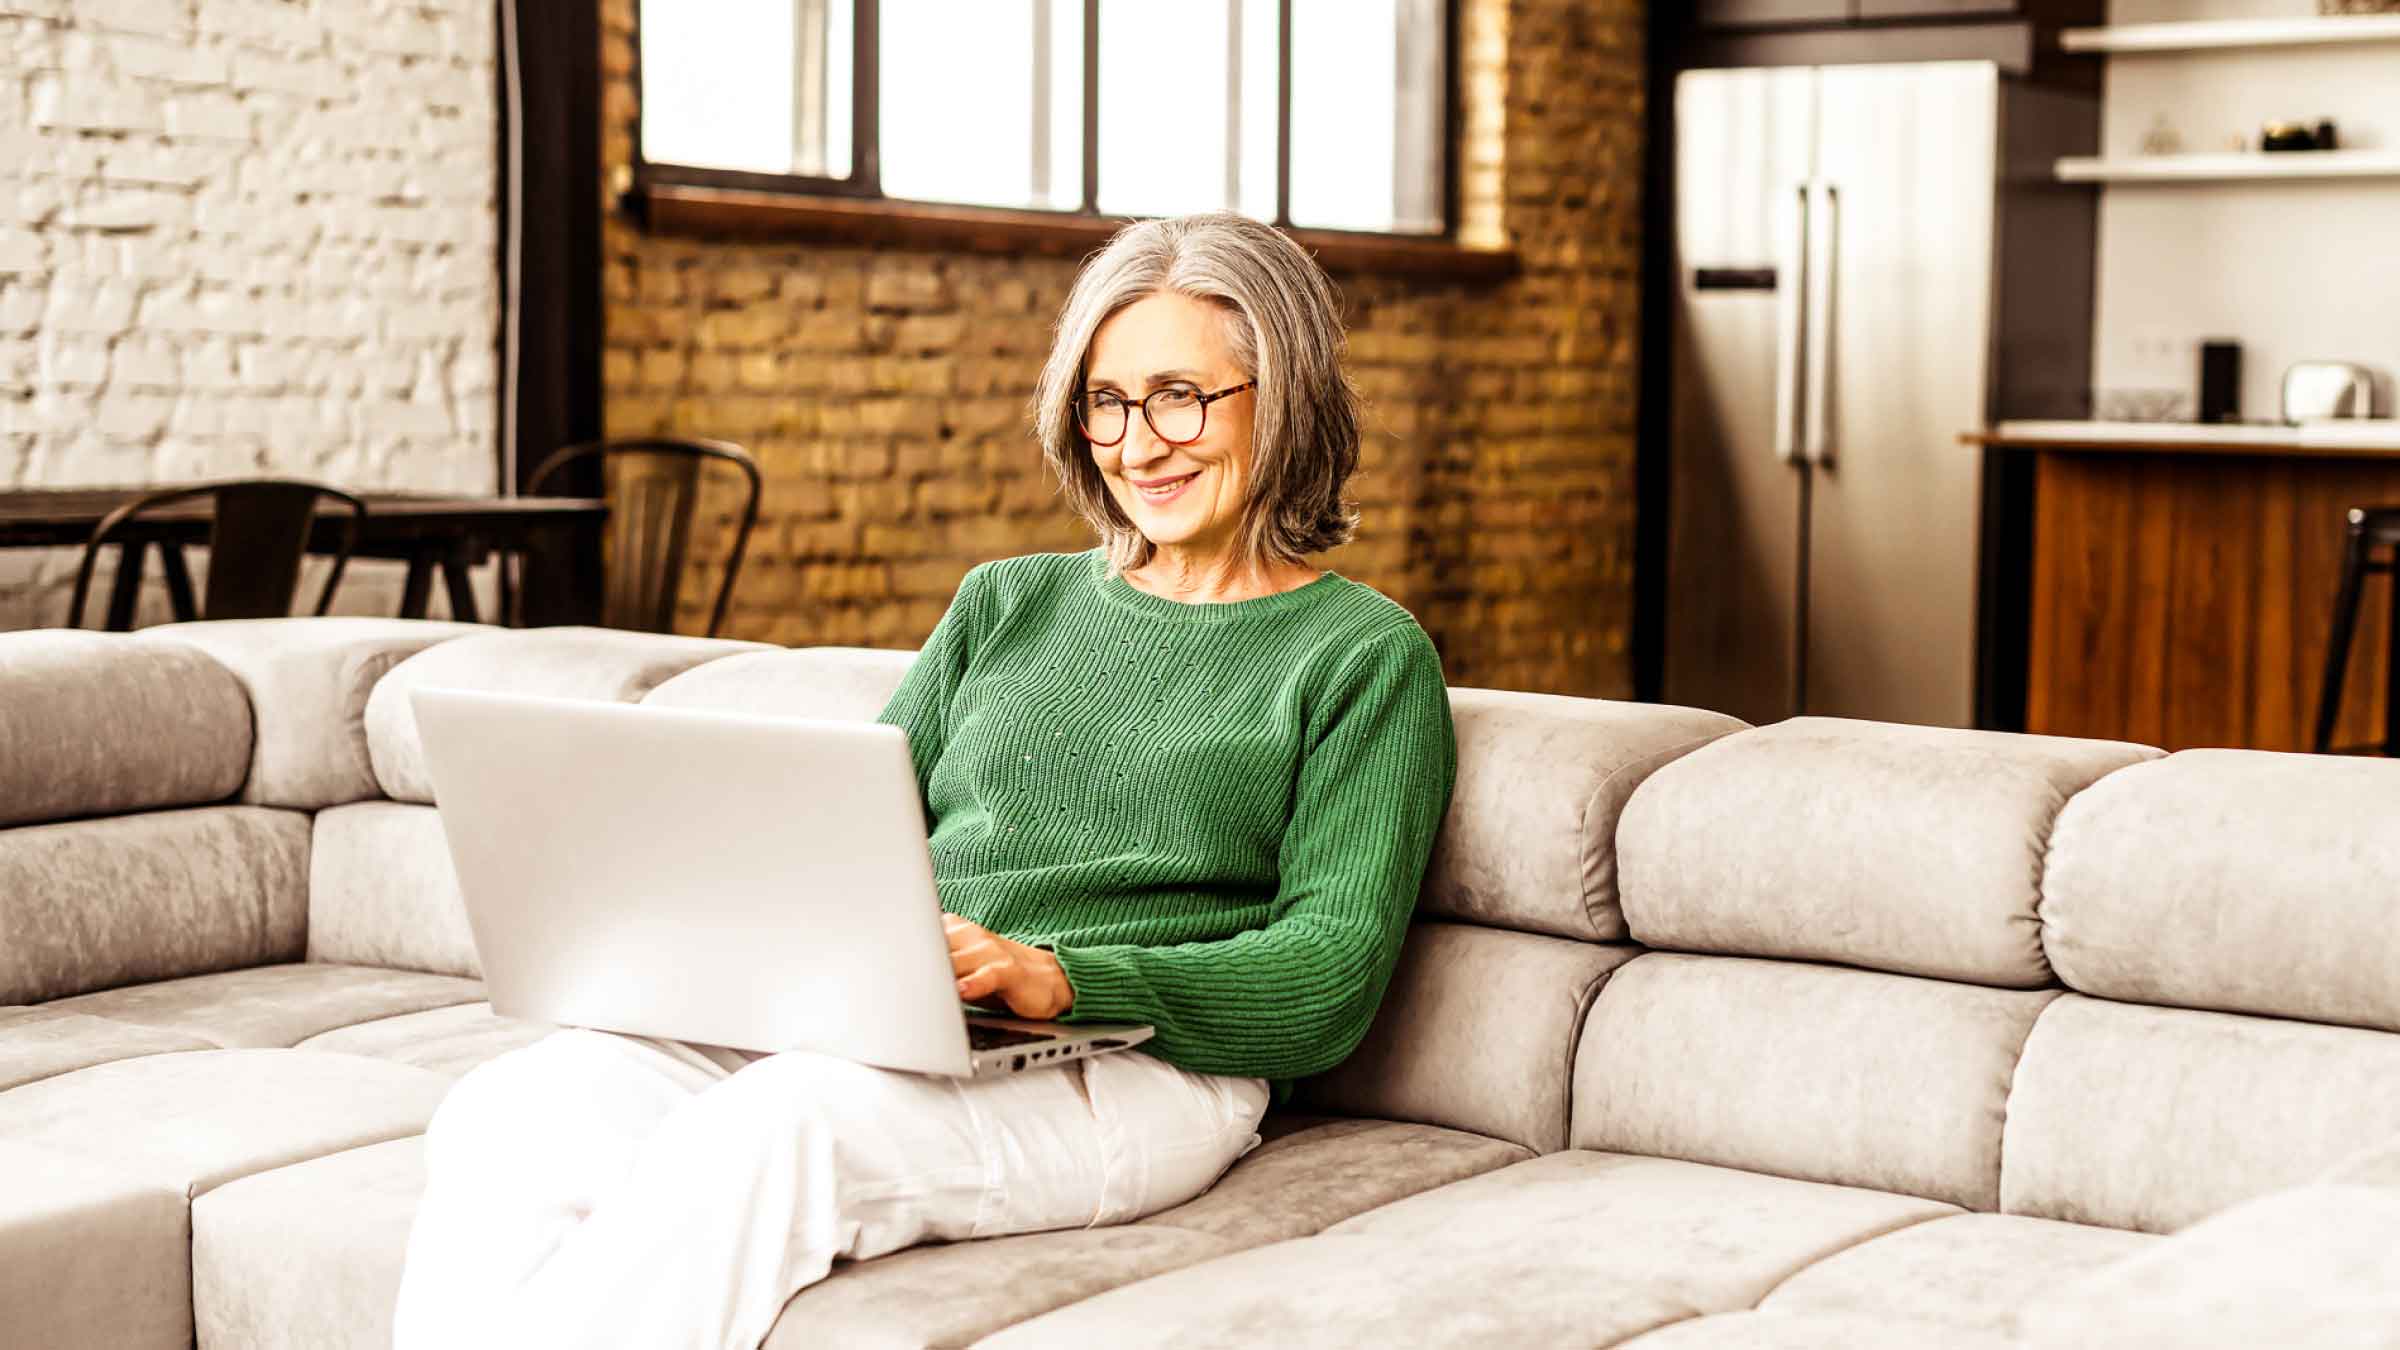 Smart woman with glasses and green jumper sits on sofa while looking at her laptop perched on her lap.